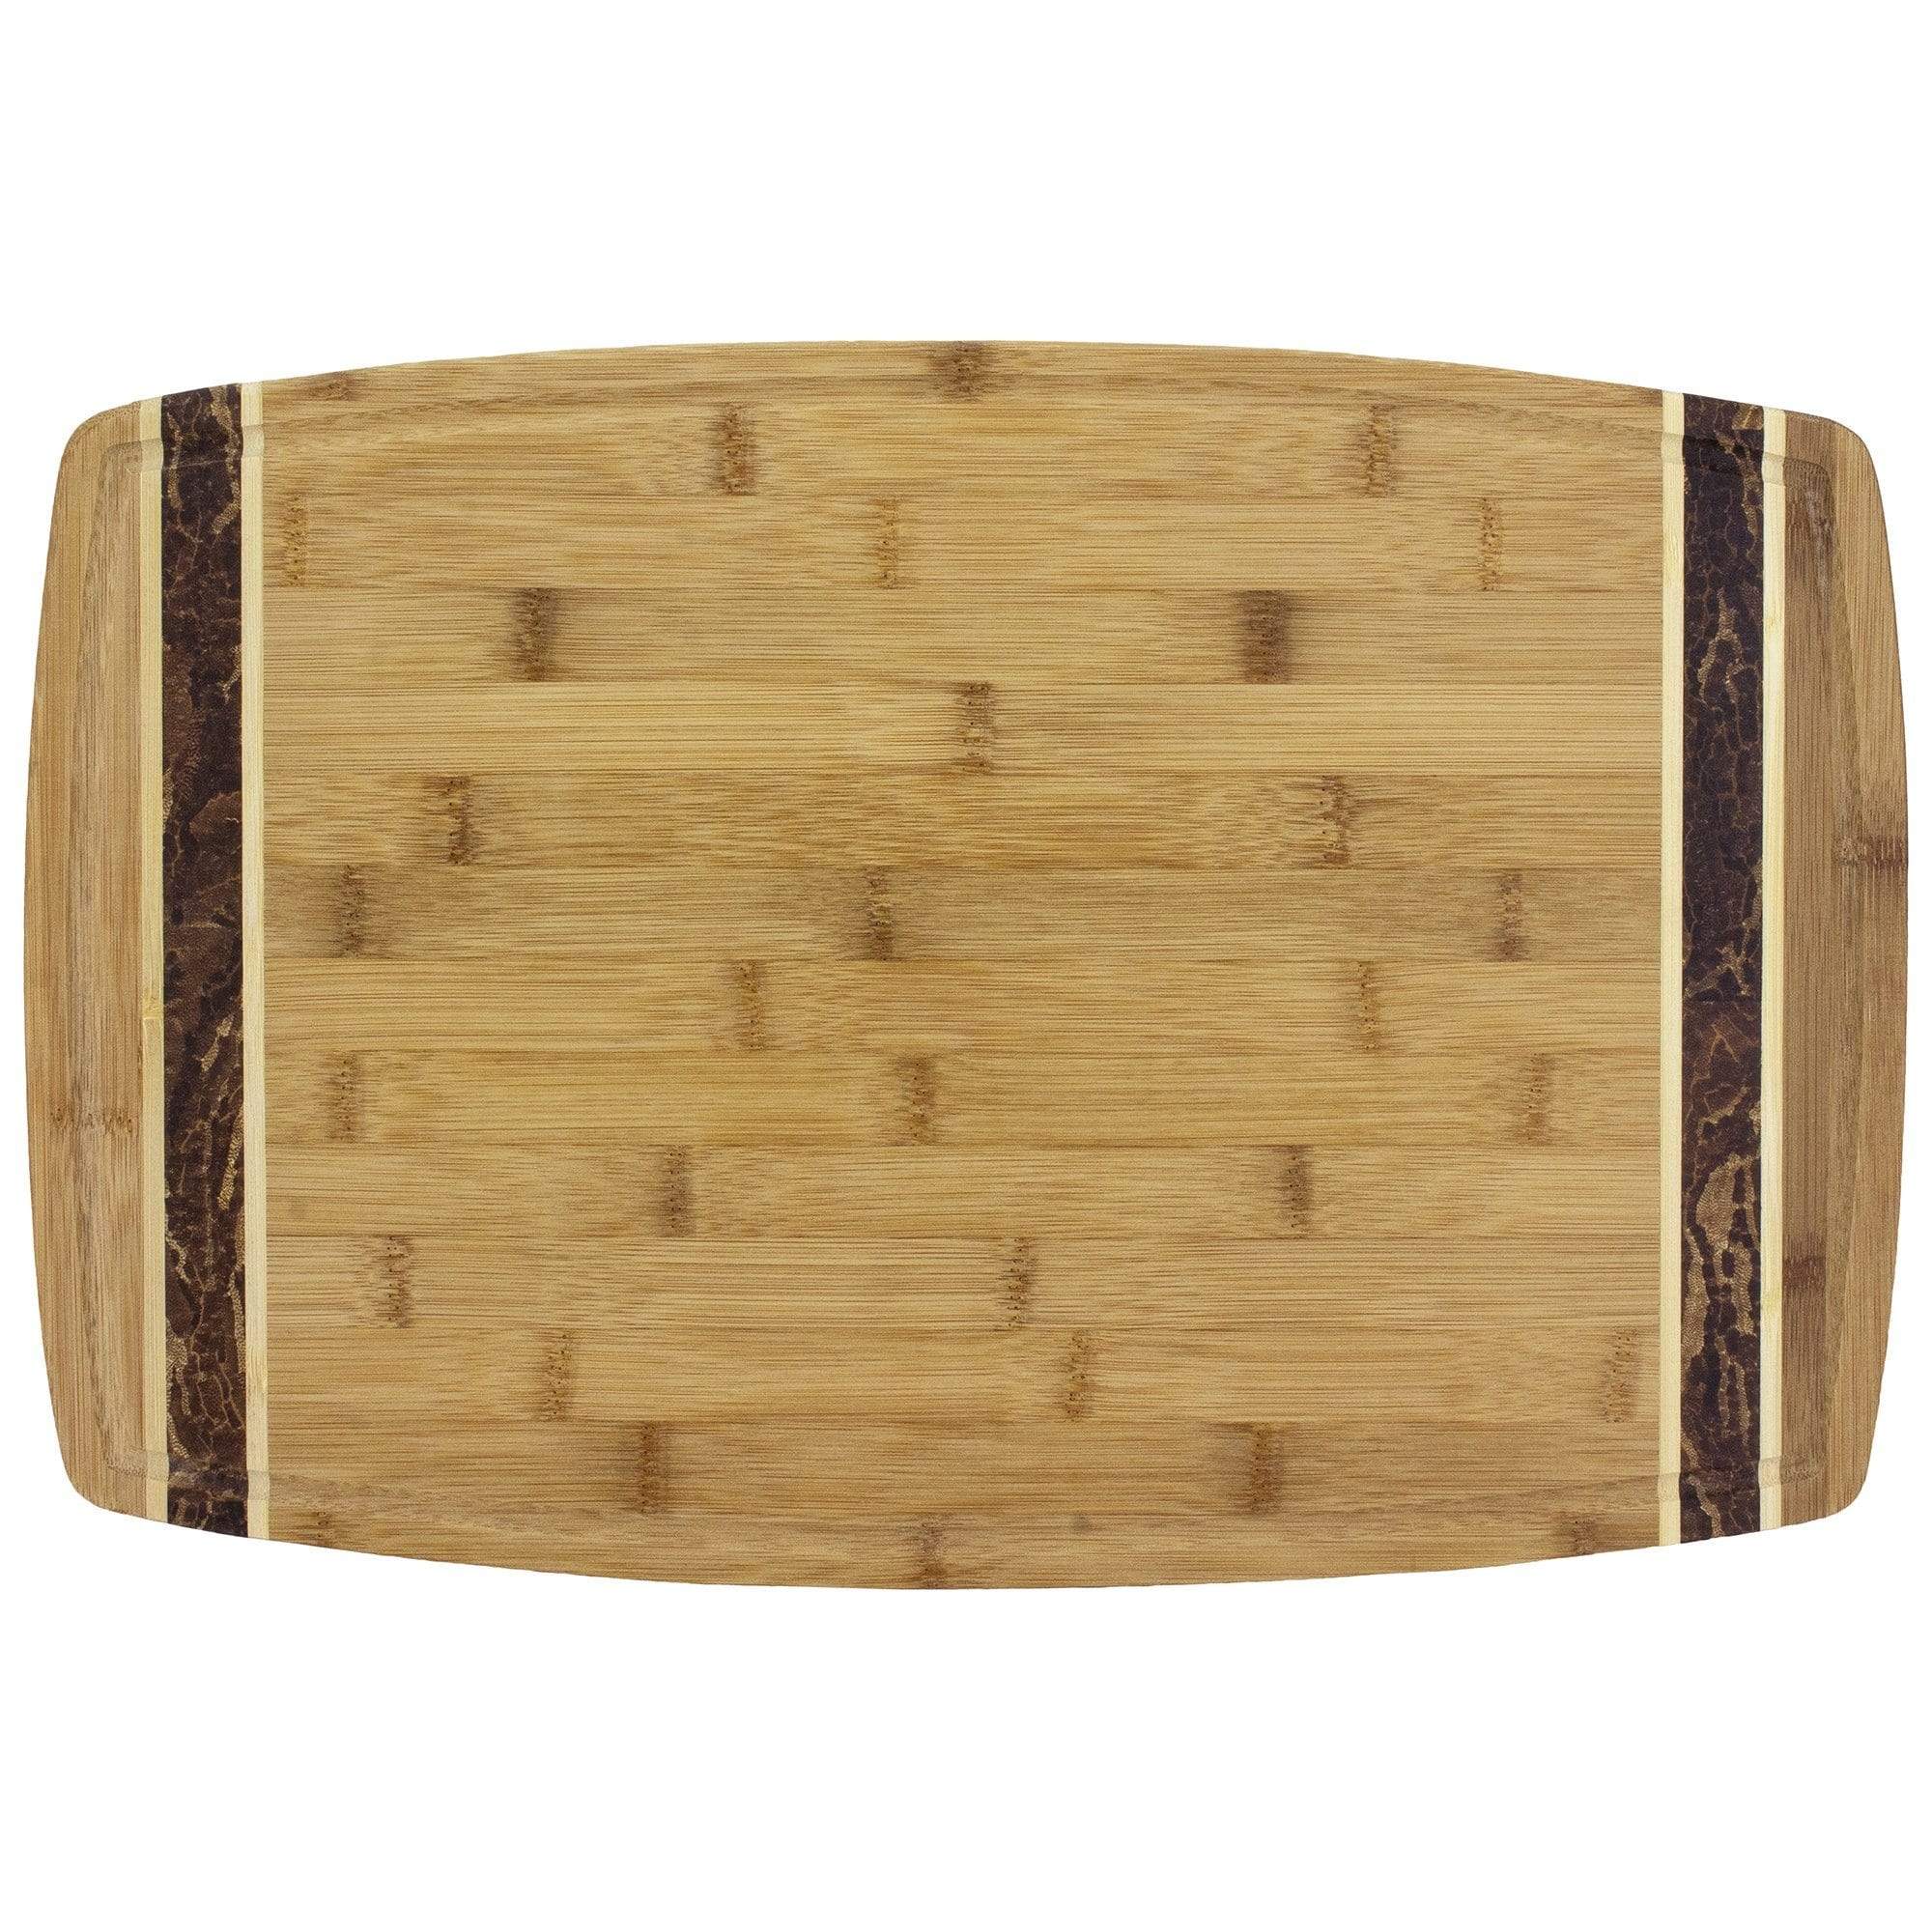 Totally Bamboo Marbled Bamboo Cutting Board, 18-inch